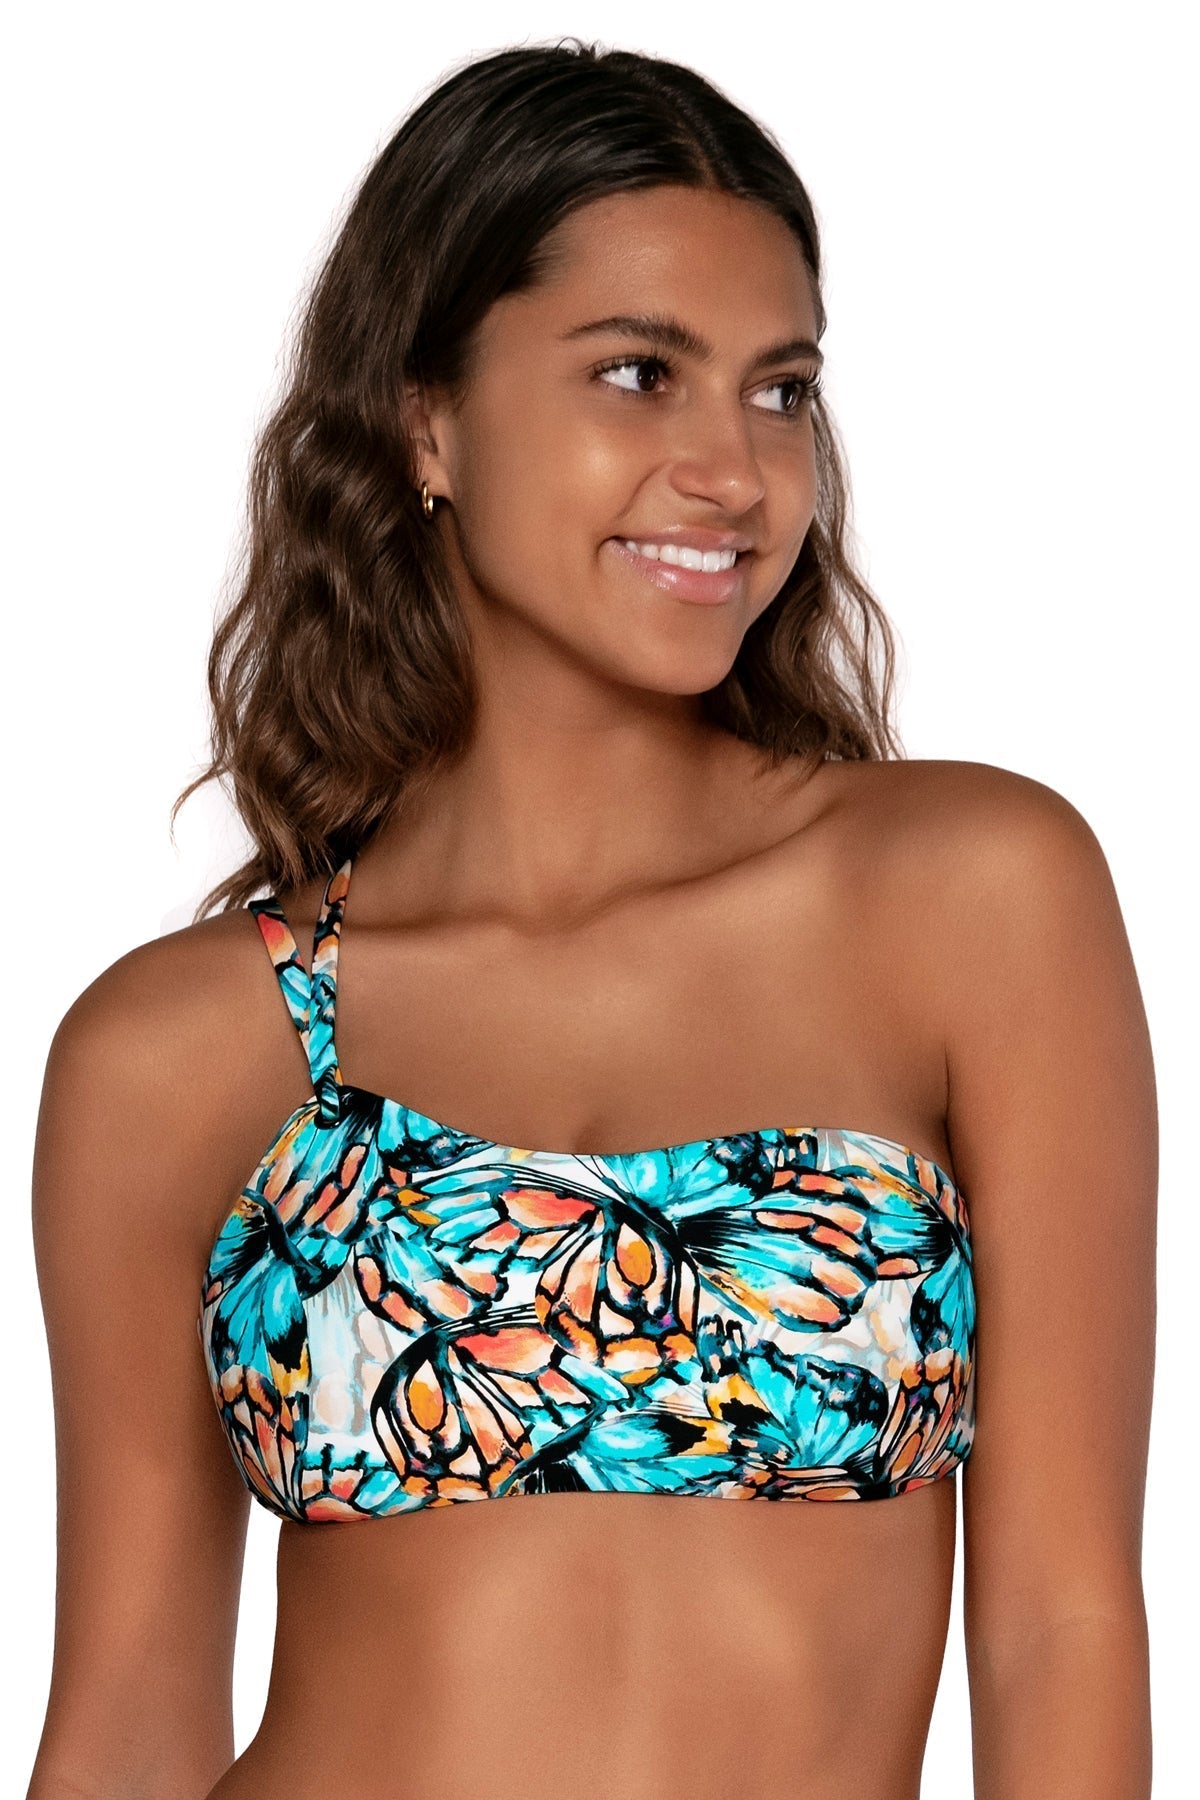 Swim Systems "Brands,Swimwear" Swim Systems Pacific Grove Reese One Shoulder Top